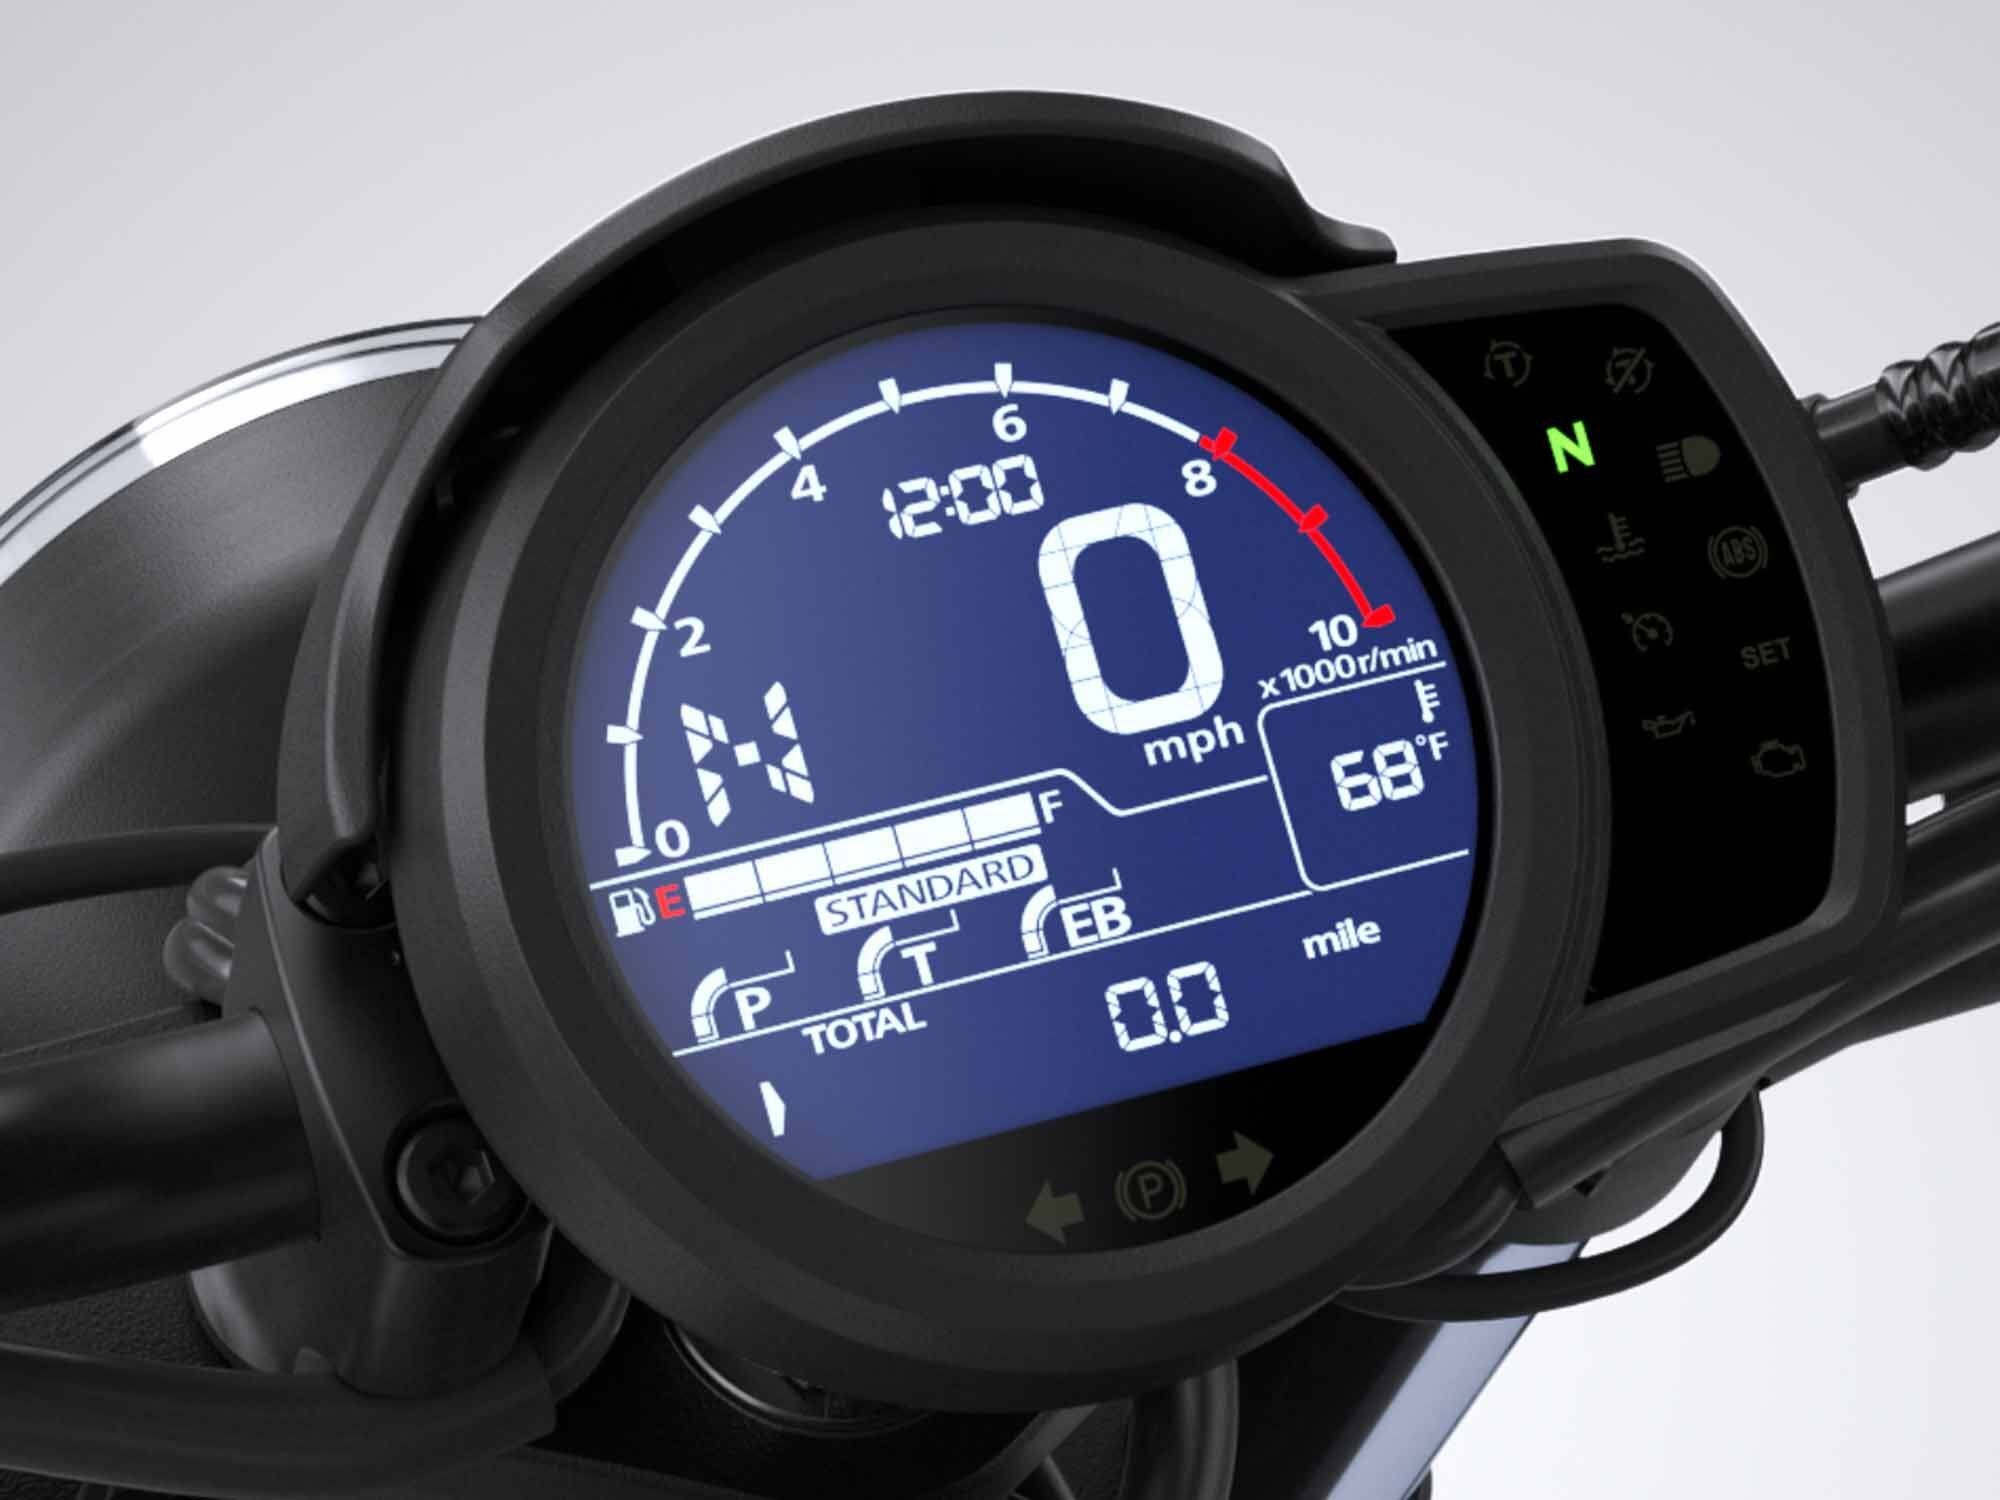 The LCD dash displays the speedometer, tachometer, gear-position indicator, fuel indicator, and ride modes.